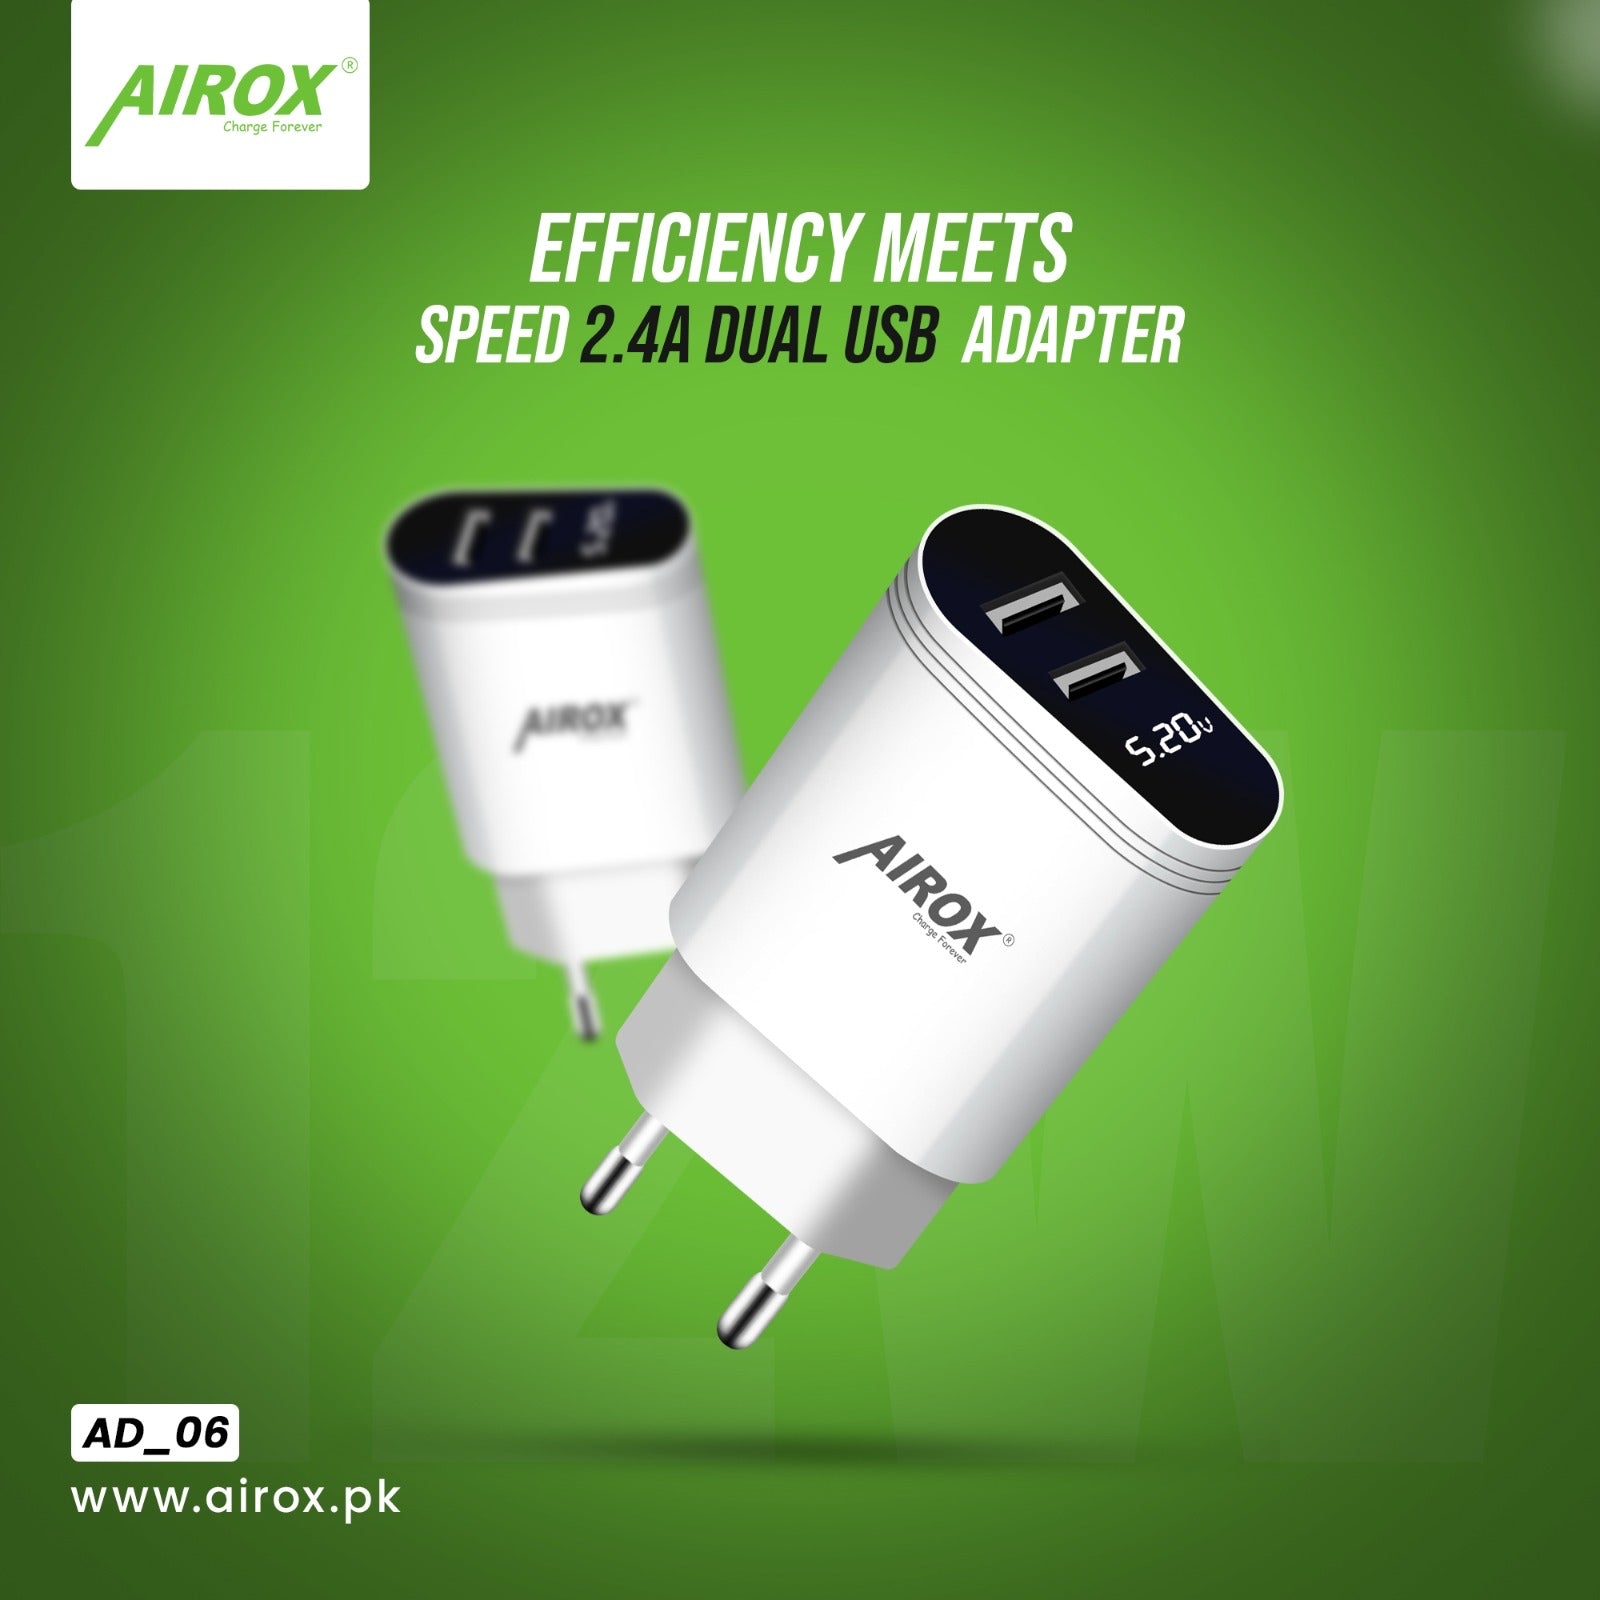 Airox 2.4A  Charging Adapter 2 Usb Port with LED Display Airox.pk